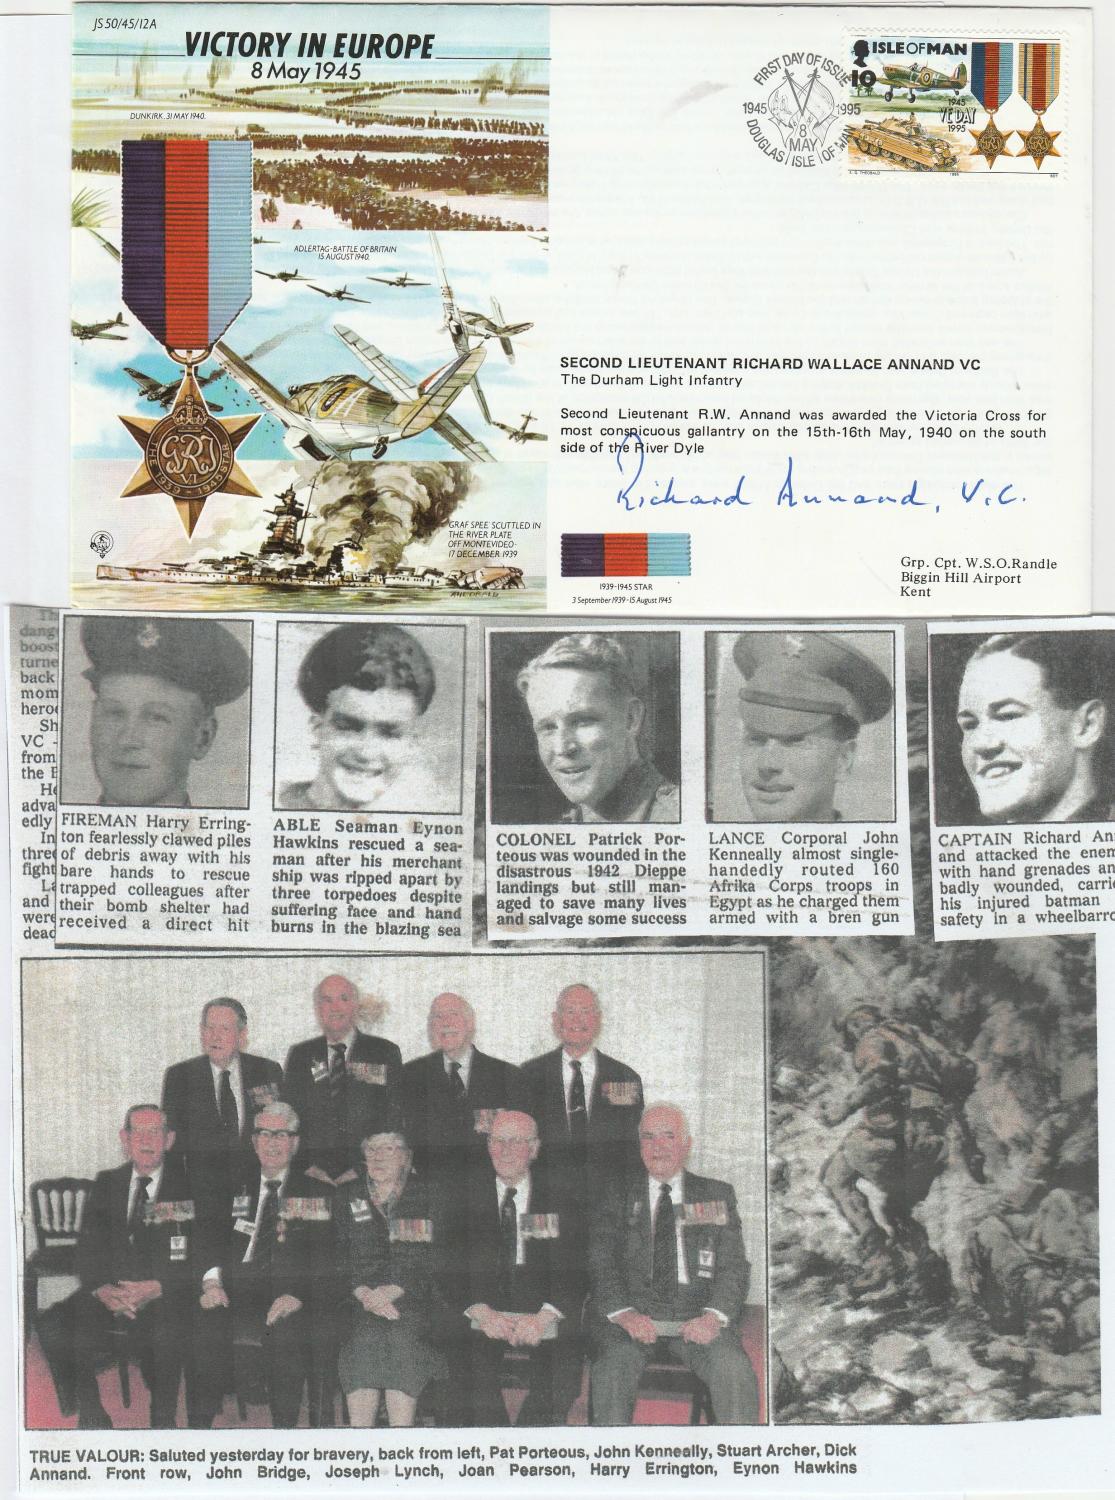 Commemorative FDC JS50, 45, 12A 'Victory in Europe 8 May 1945. Signed by 2nd Lieutenant Richard